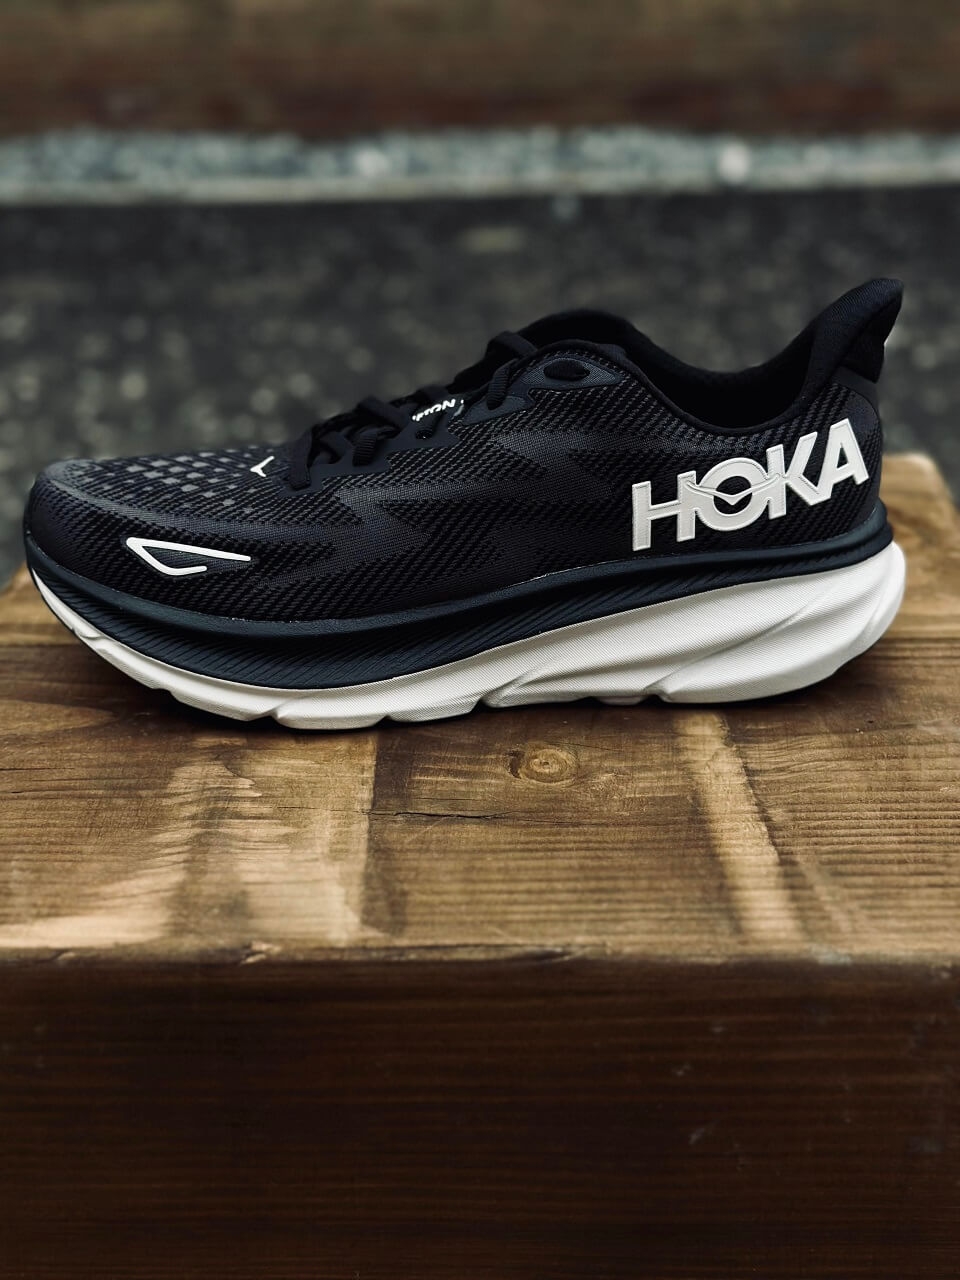 Lateral view of HOKA running shoe in black